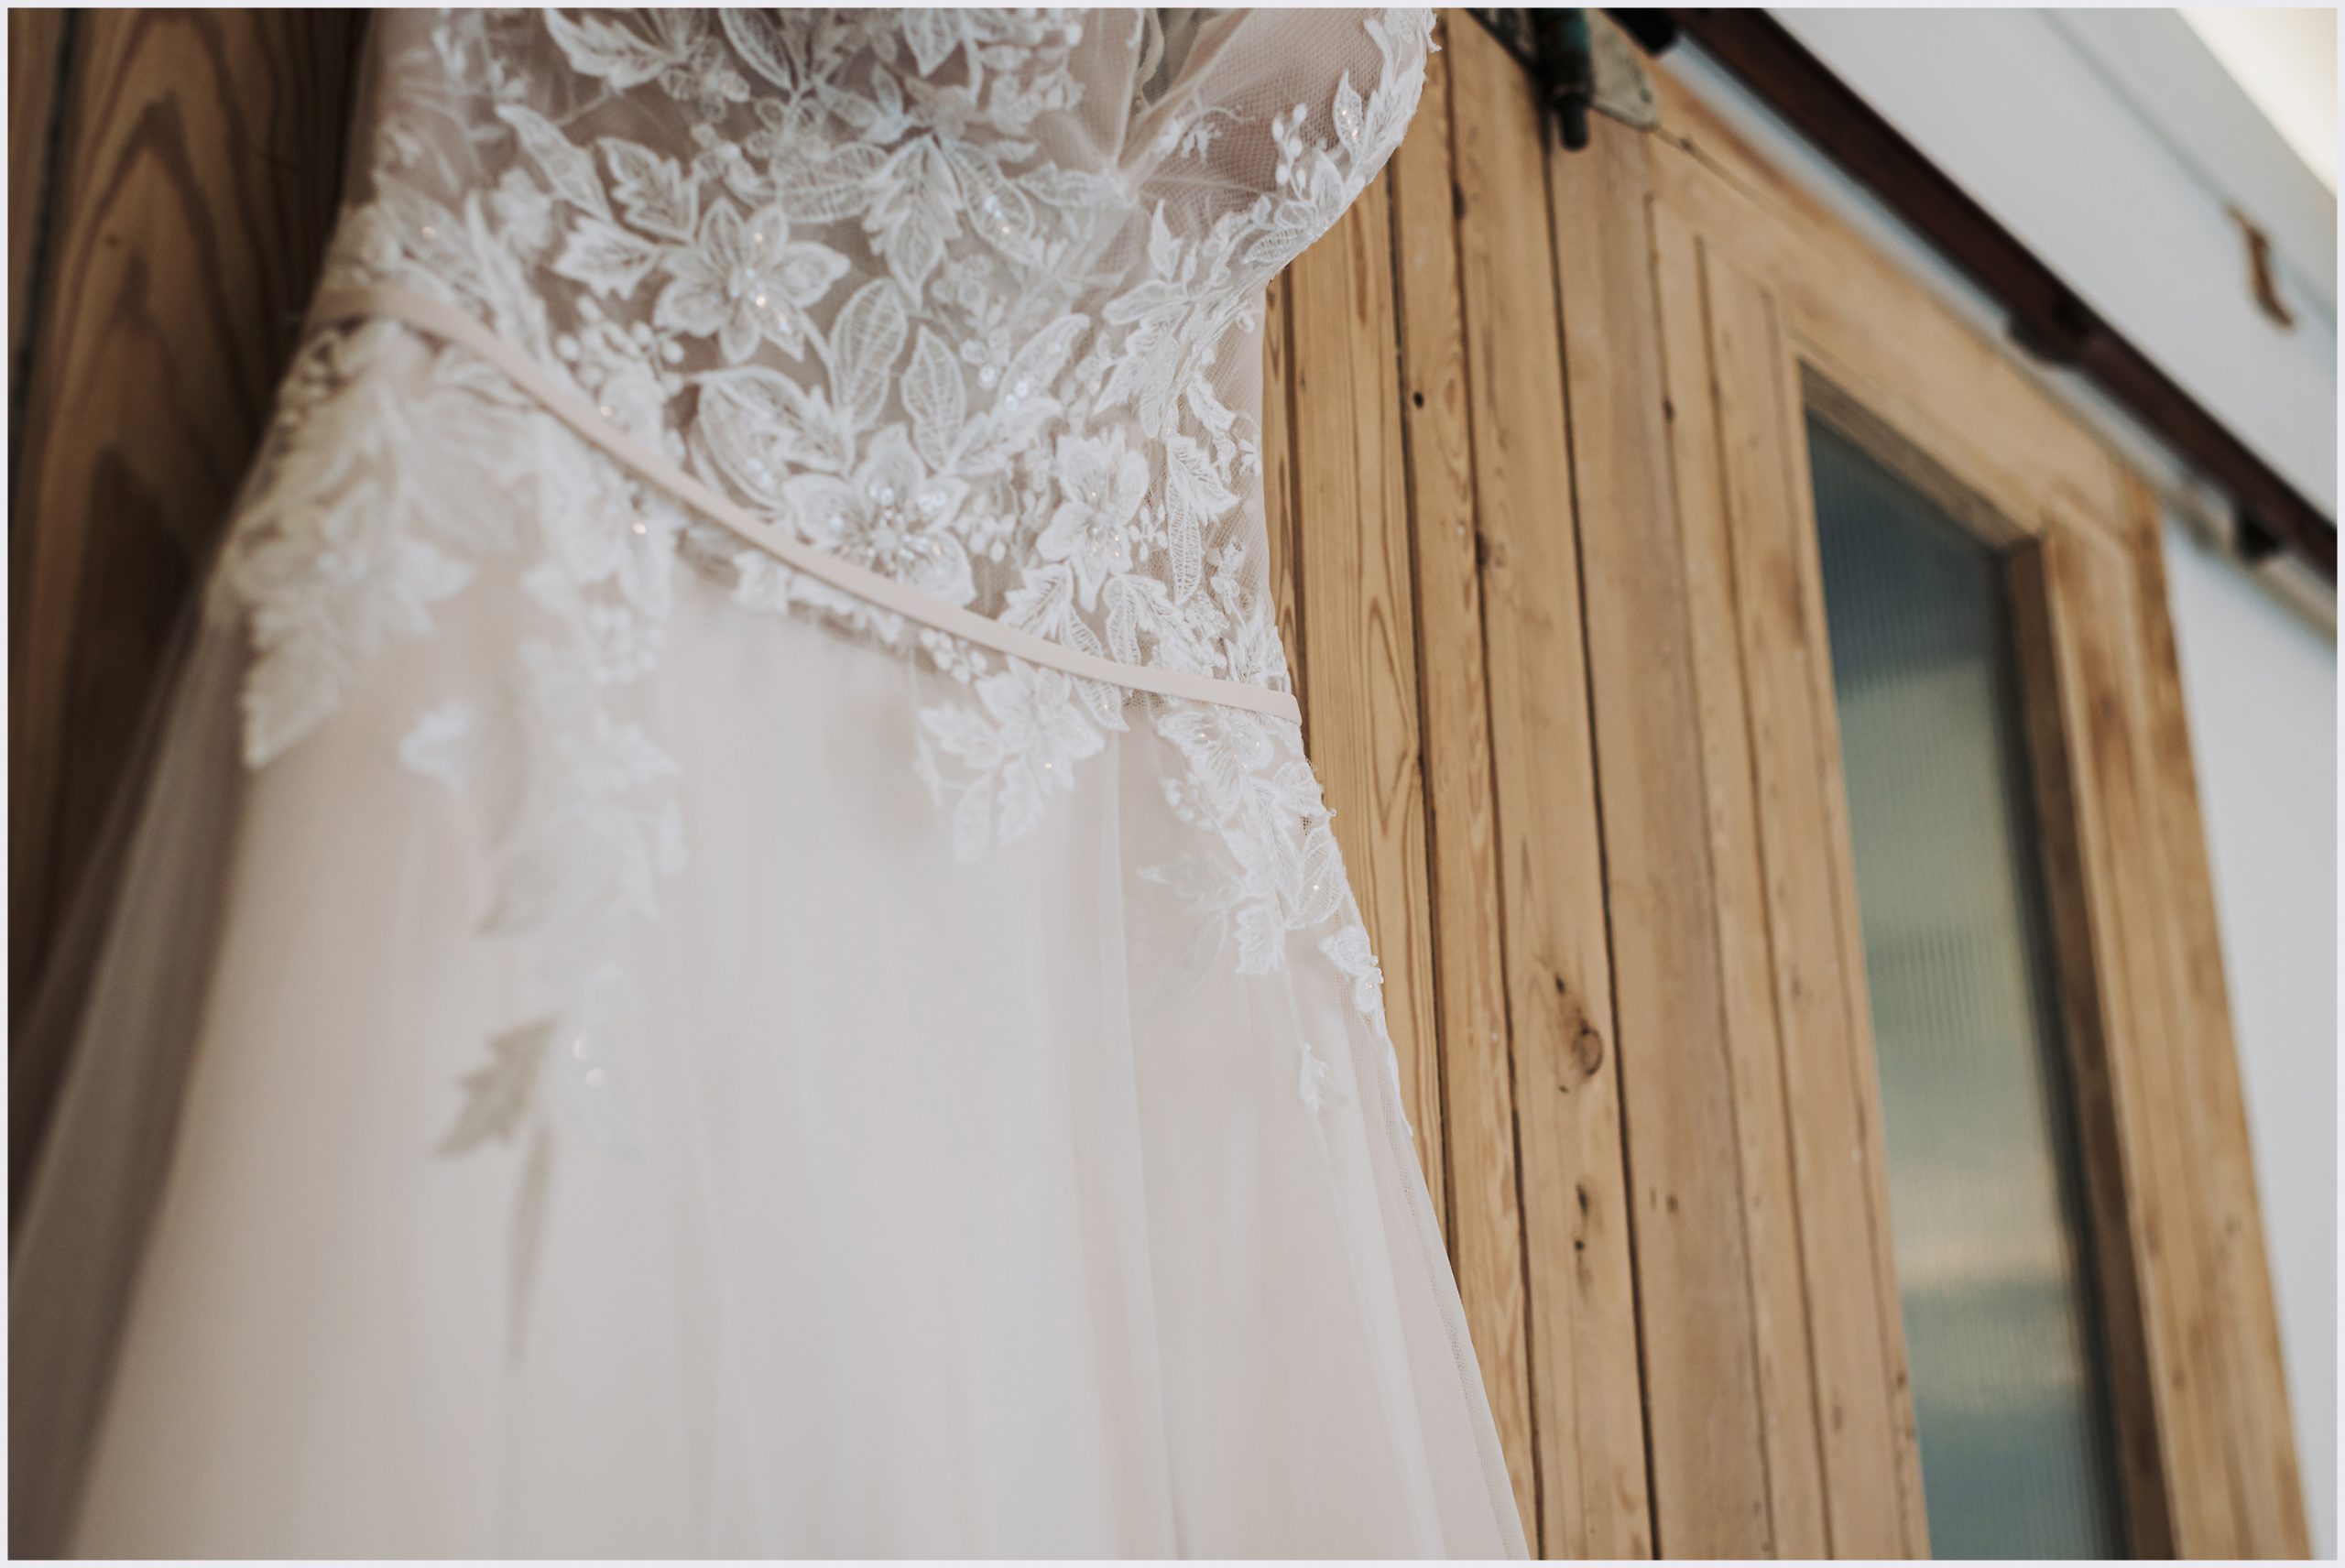 A bride's wedding gown hangs against rustic barn doors showing the lace detail.